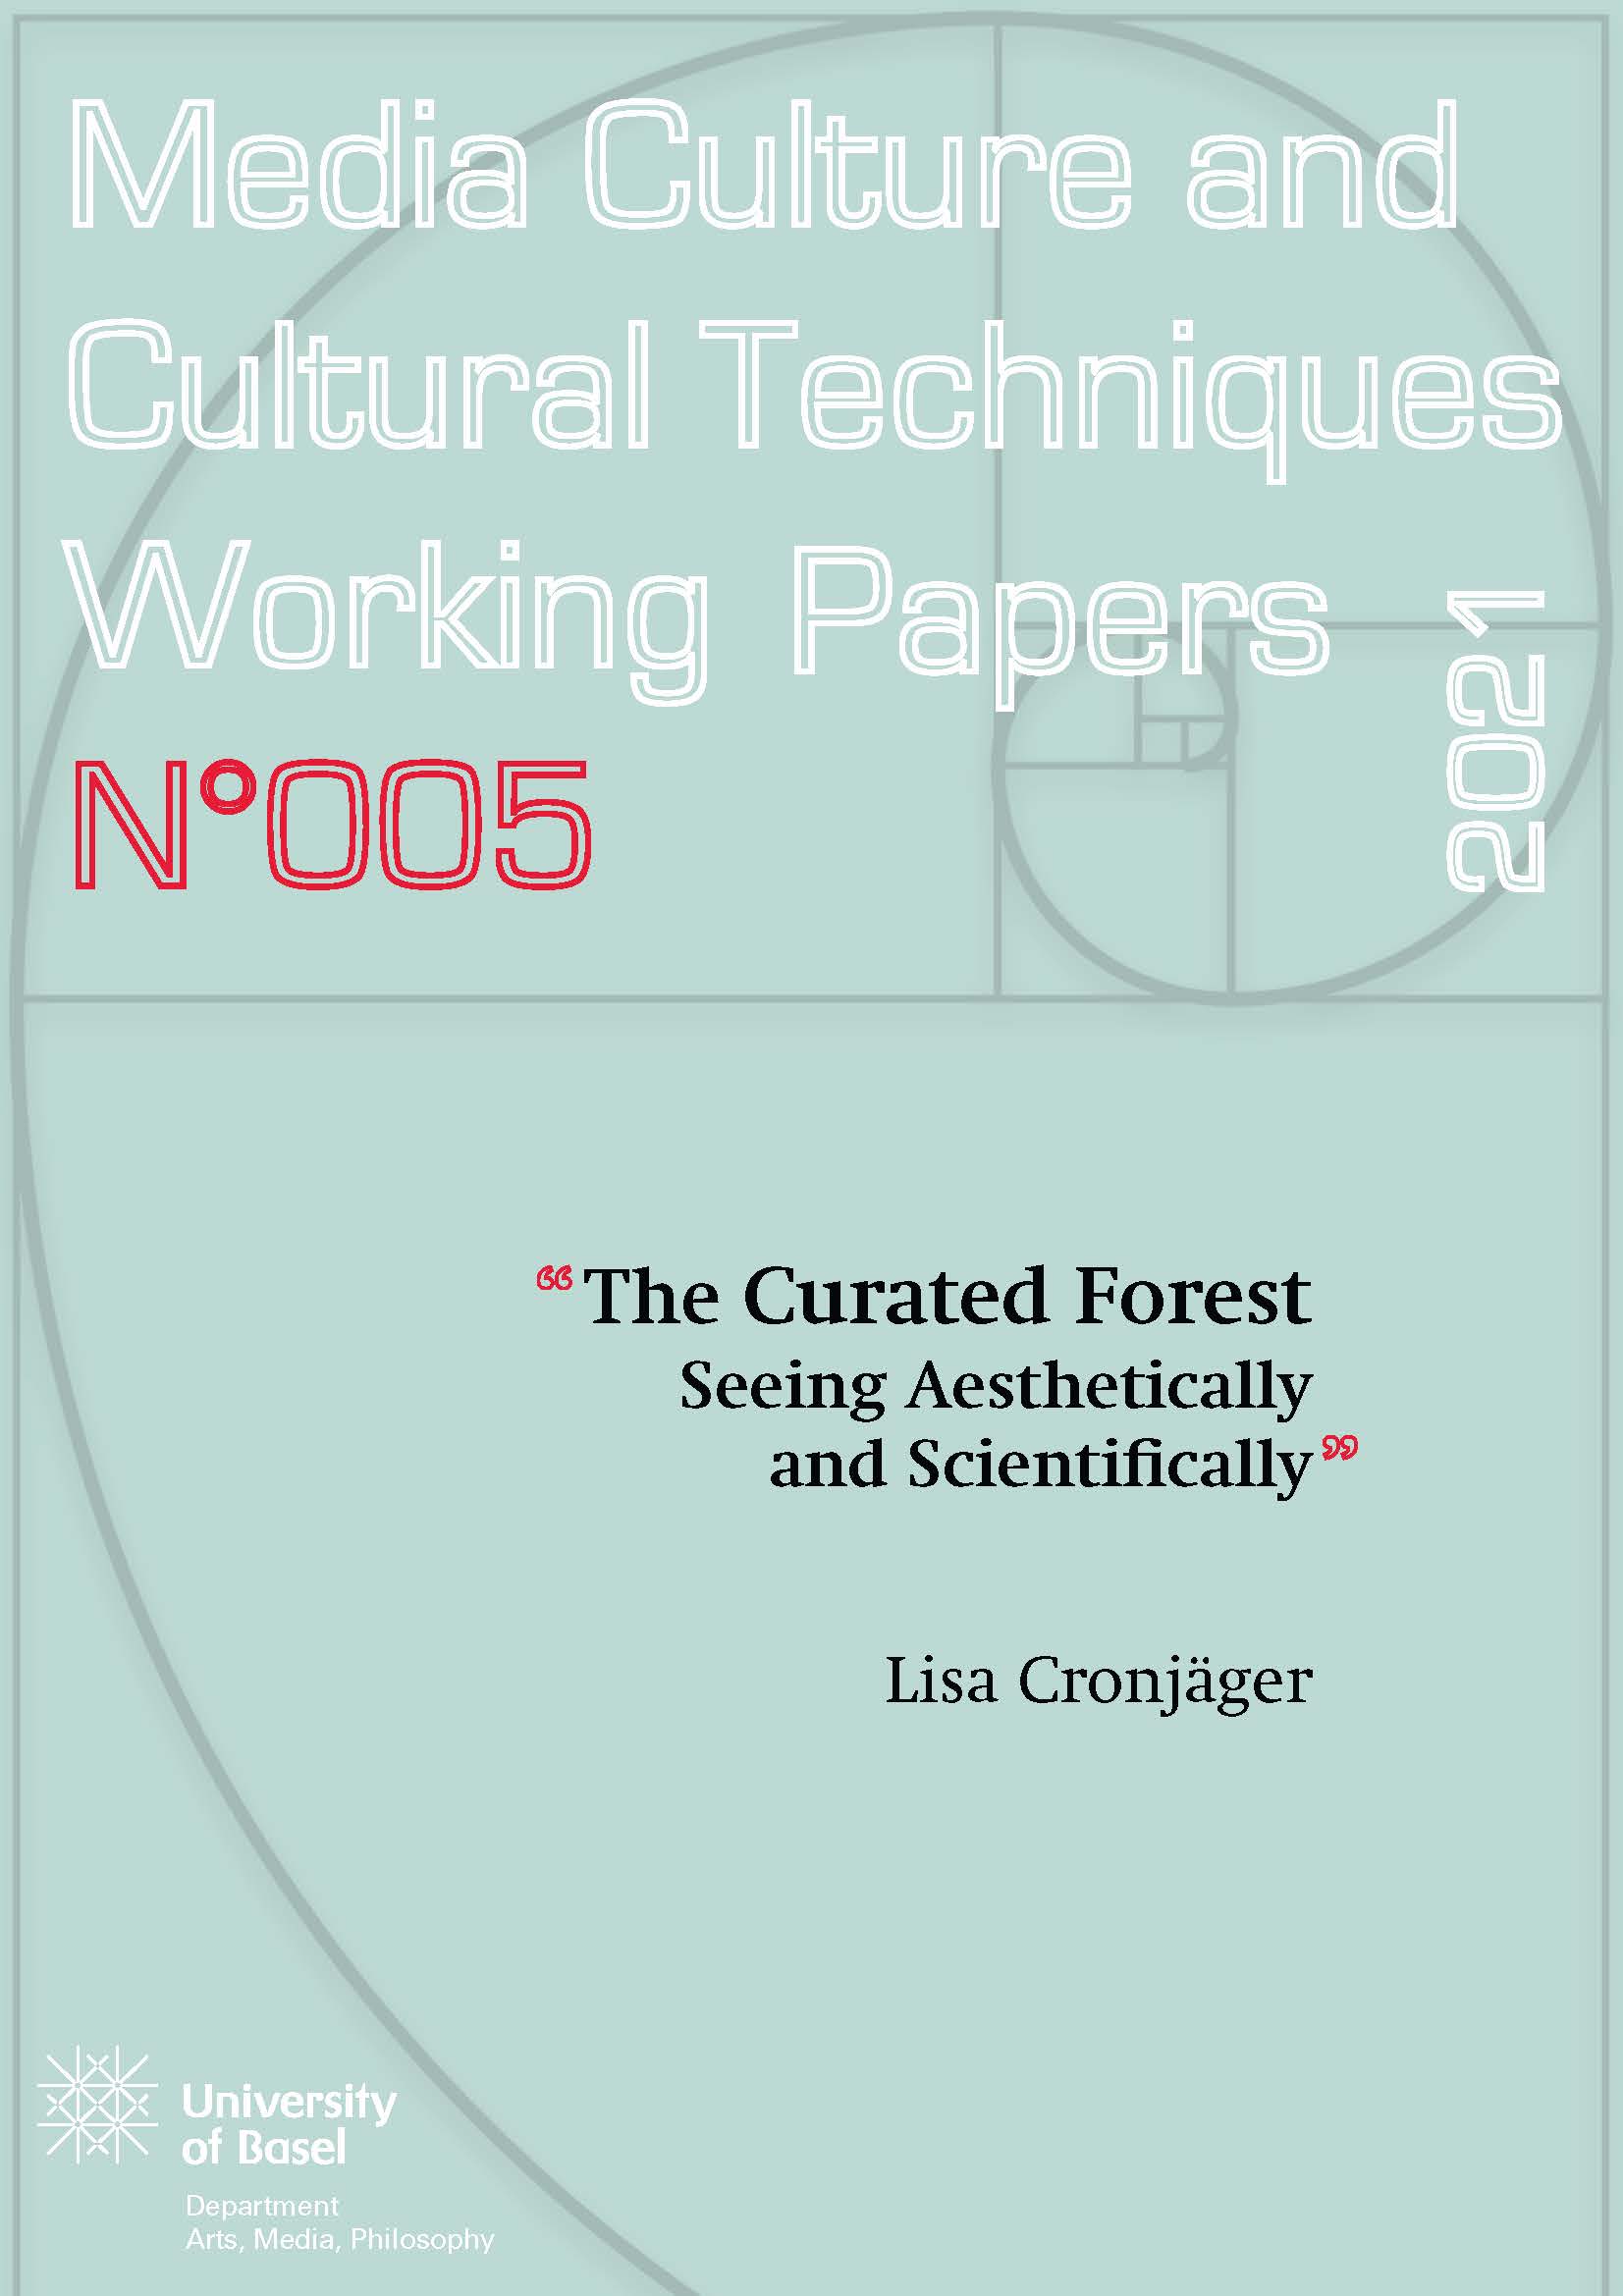 The Curated Forest Seeing Aesthetically and Scientifically